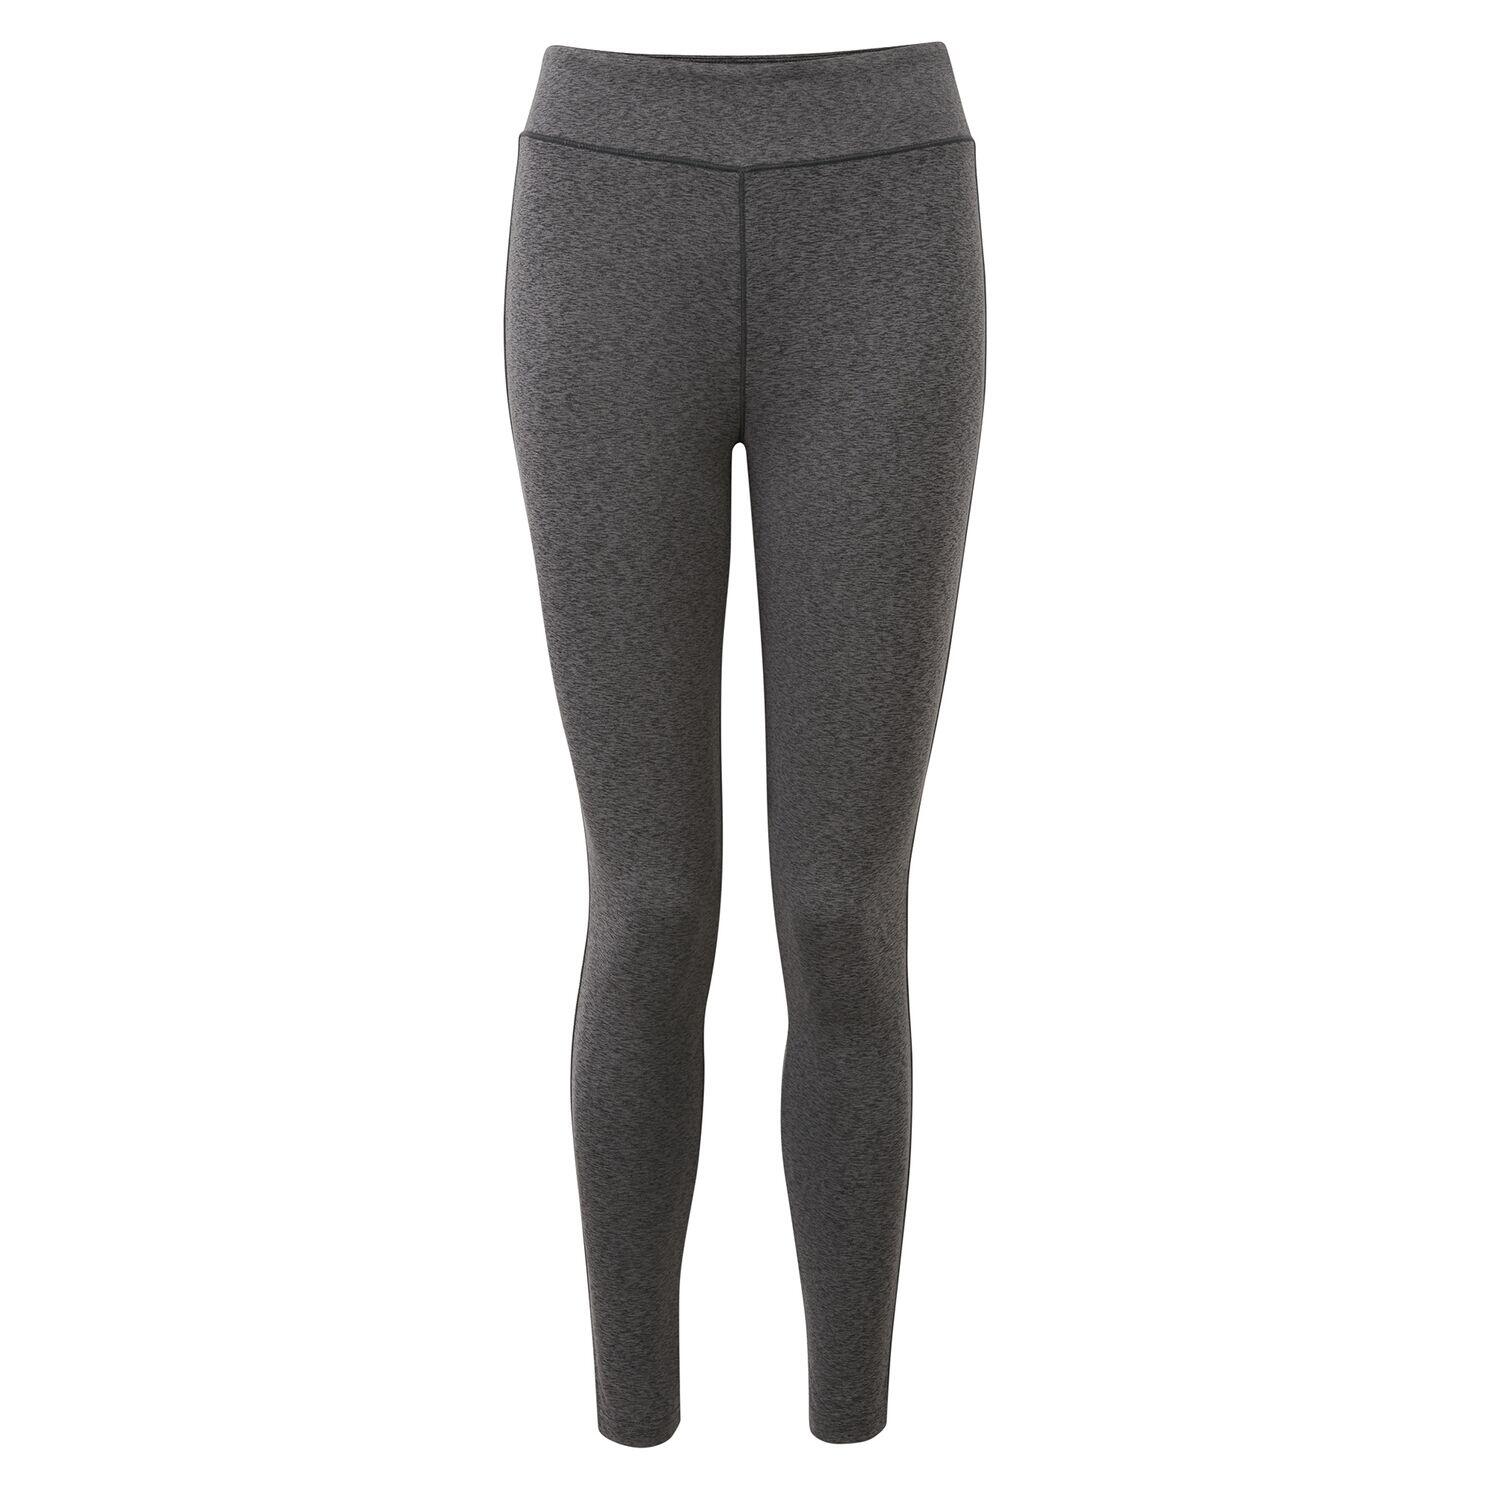 Womens/Ladies Influential Tight Lightweight Gym Leggings (Charcoal Grey) 1/4